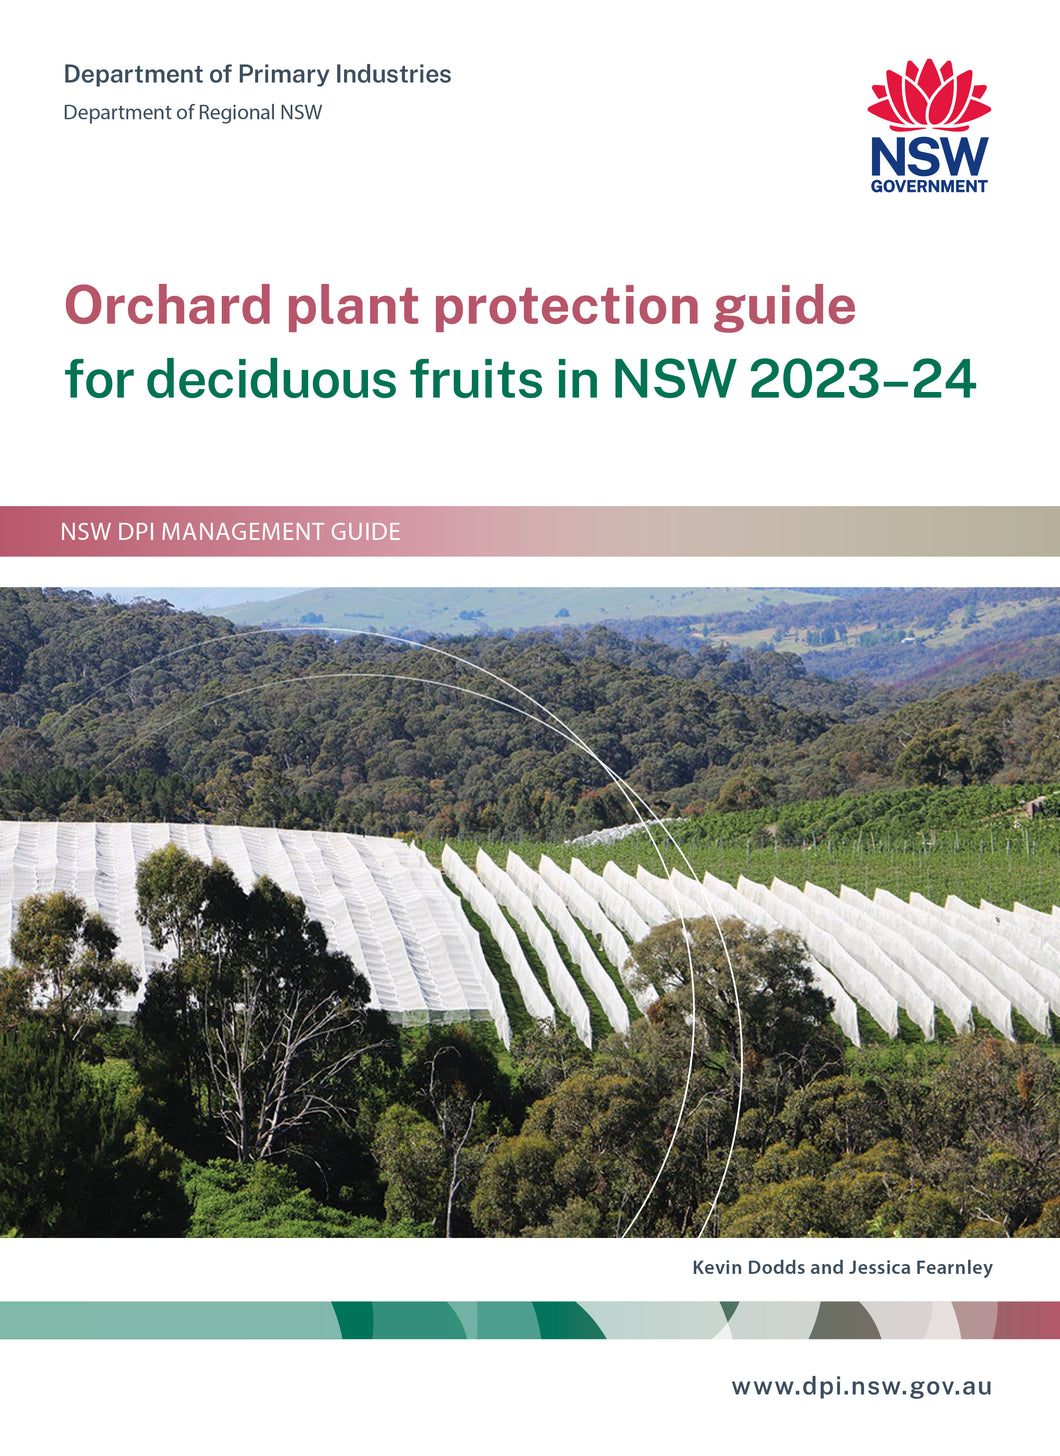 Orchard Plant Protection Guide for deciduous fruits in NSW